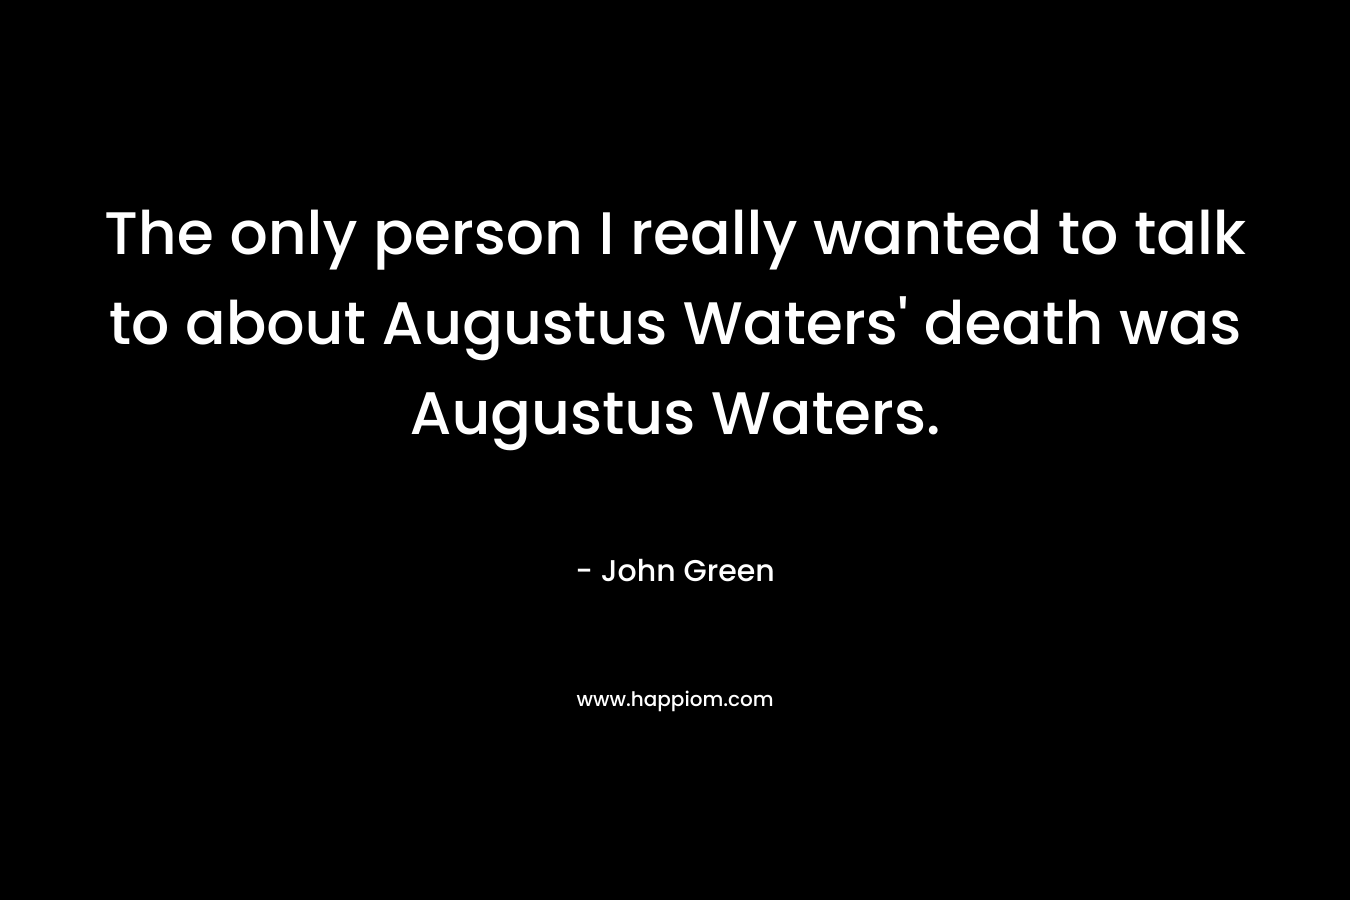 The only person I really wanted to talk to about Augustus Waters' death was Augustus Waters.